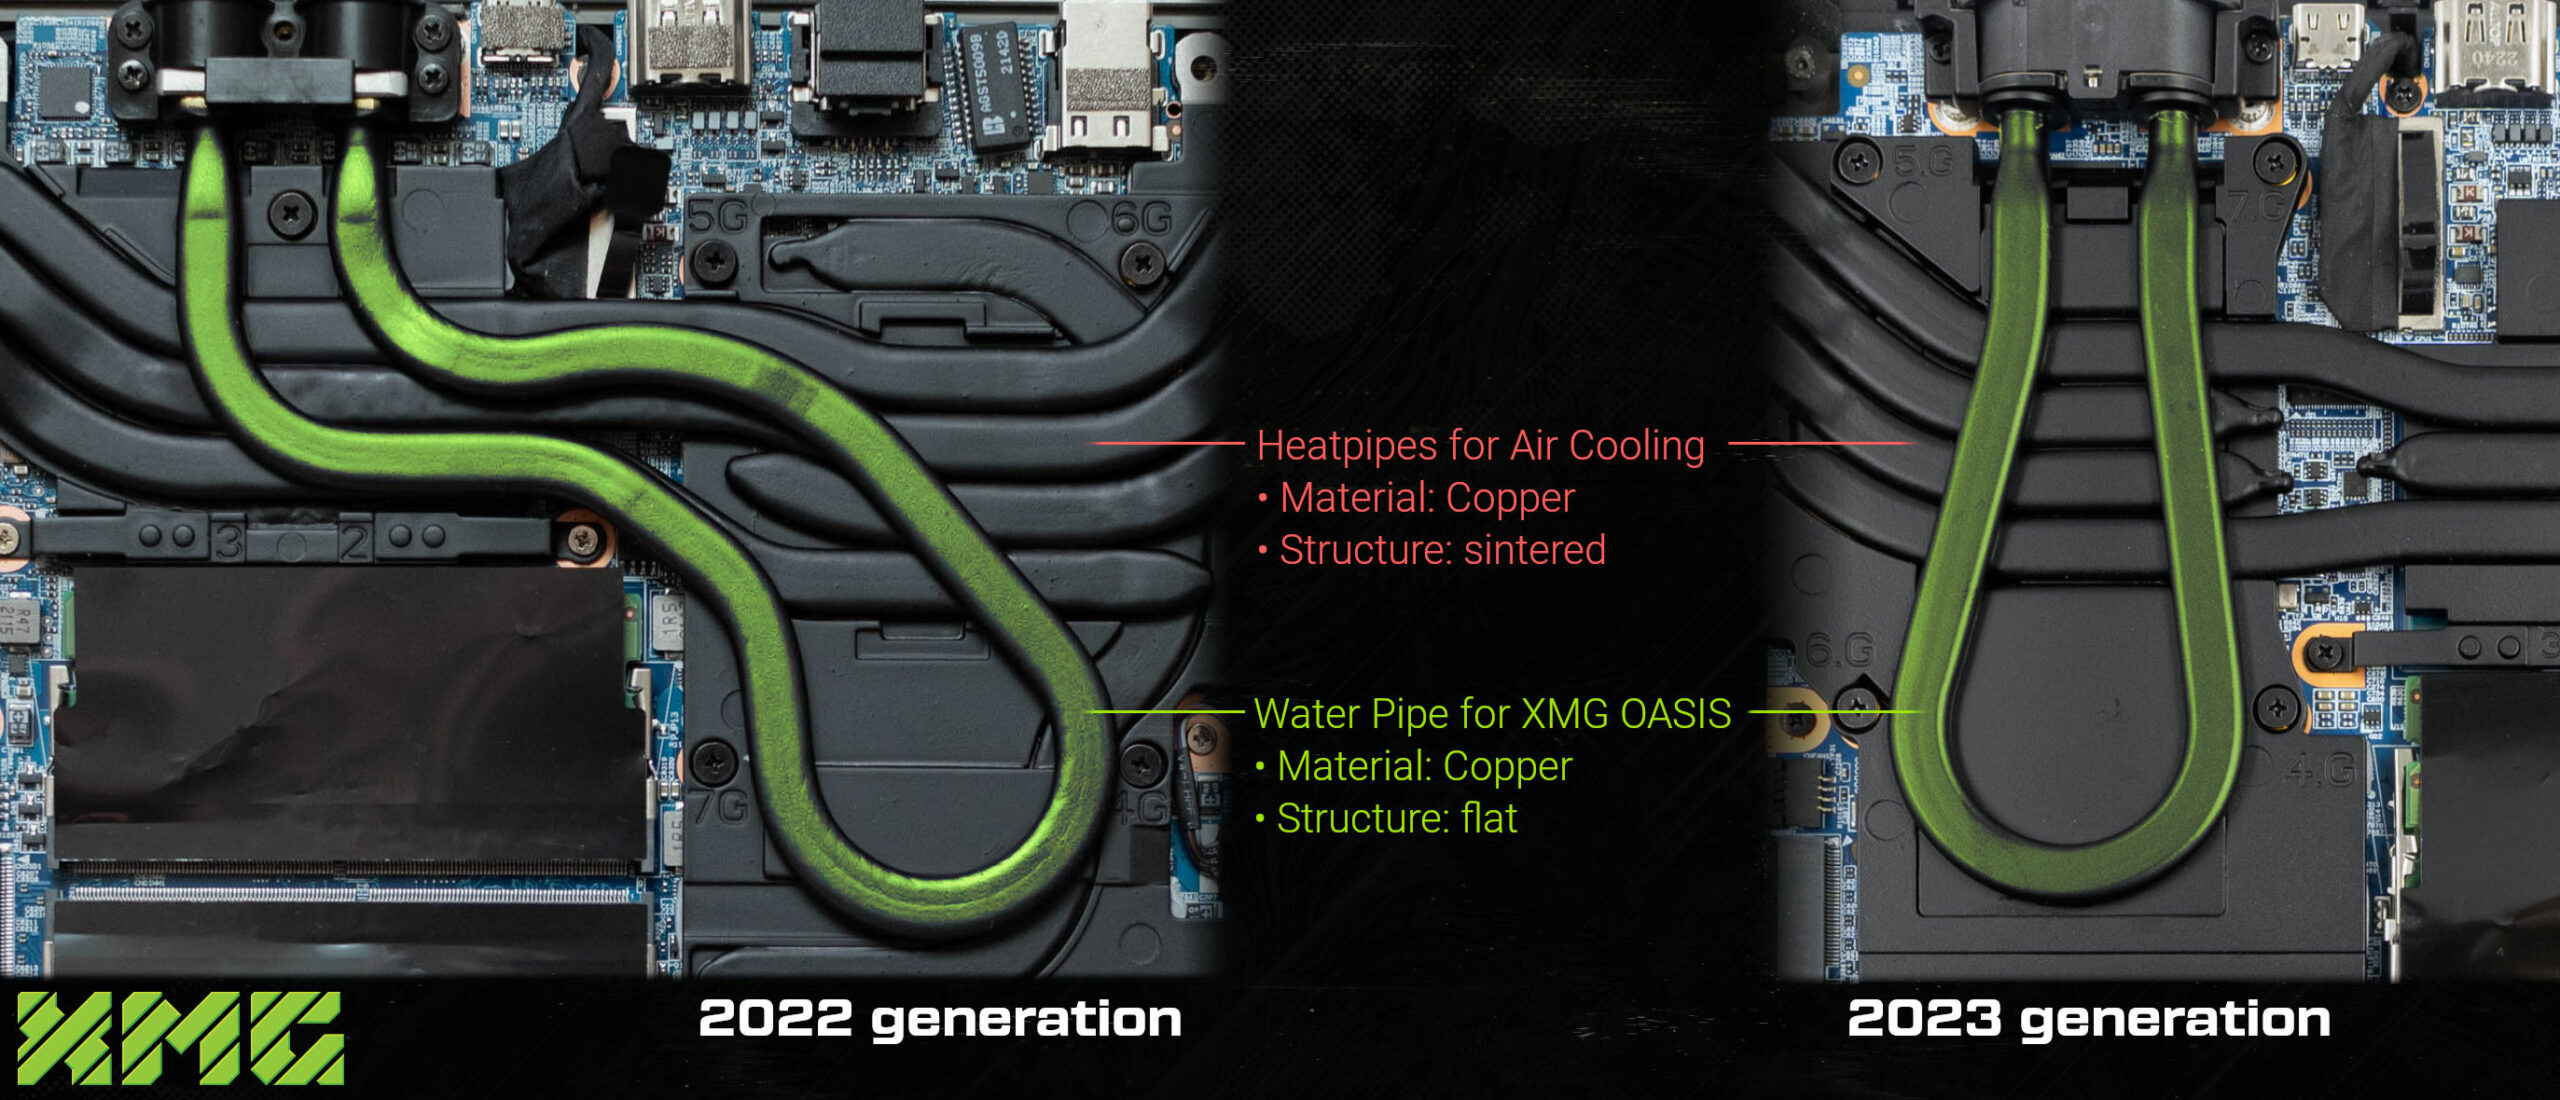 xmg oasis water pipe 2022 2023 scaled